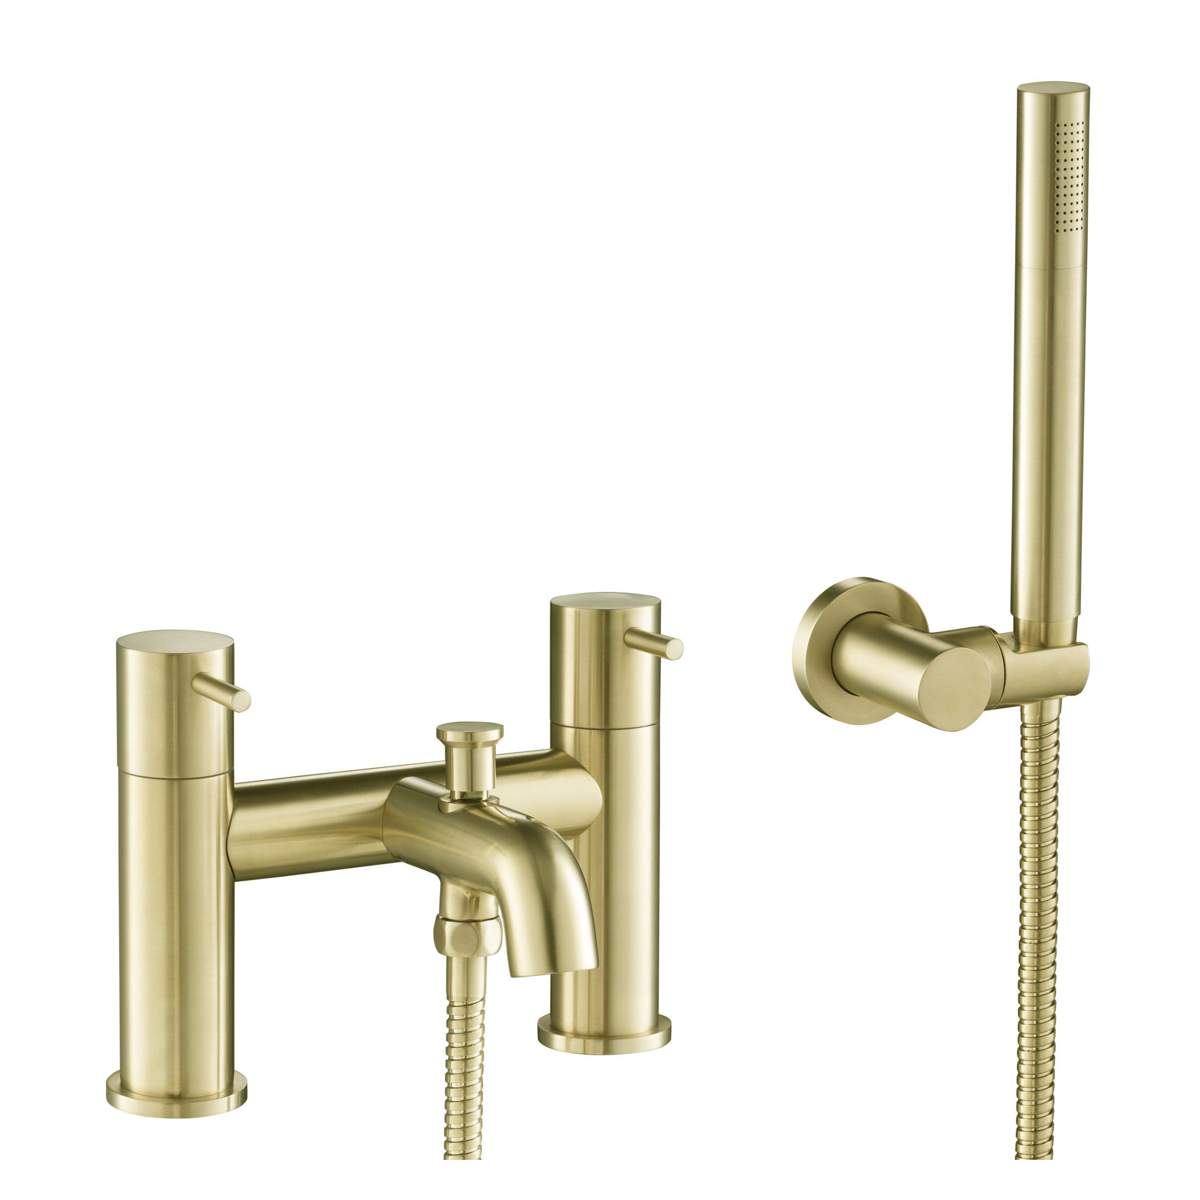 JTP Vos Brushed Brass Shower Mixer with Kit